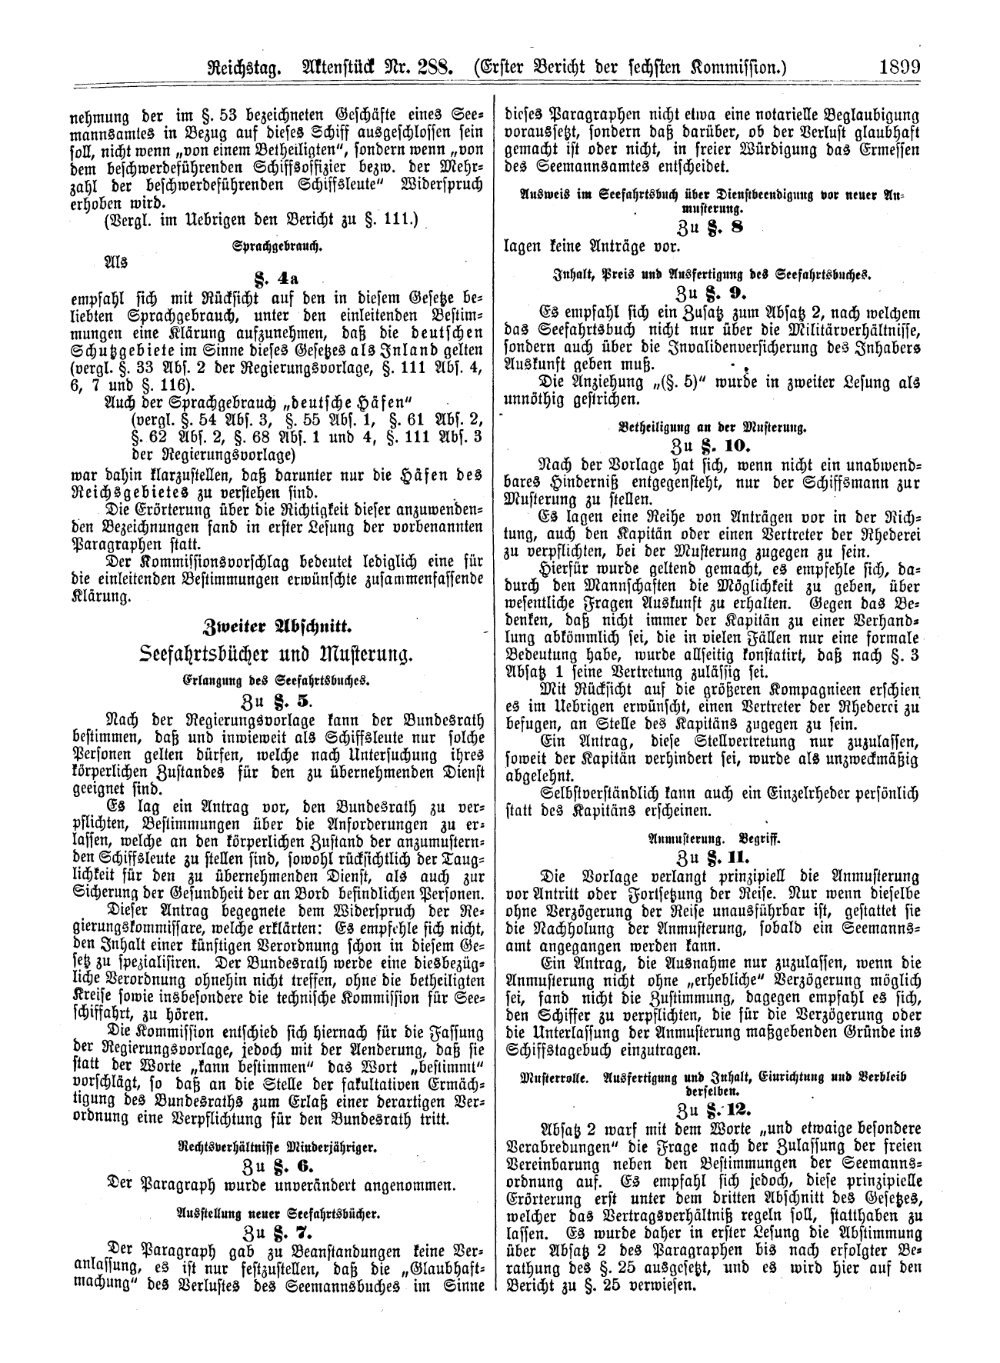 Scan of page 1899